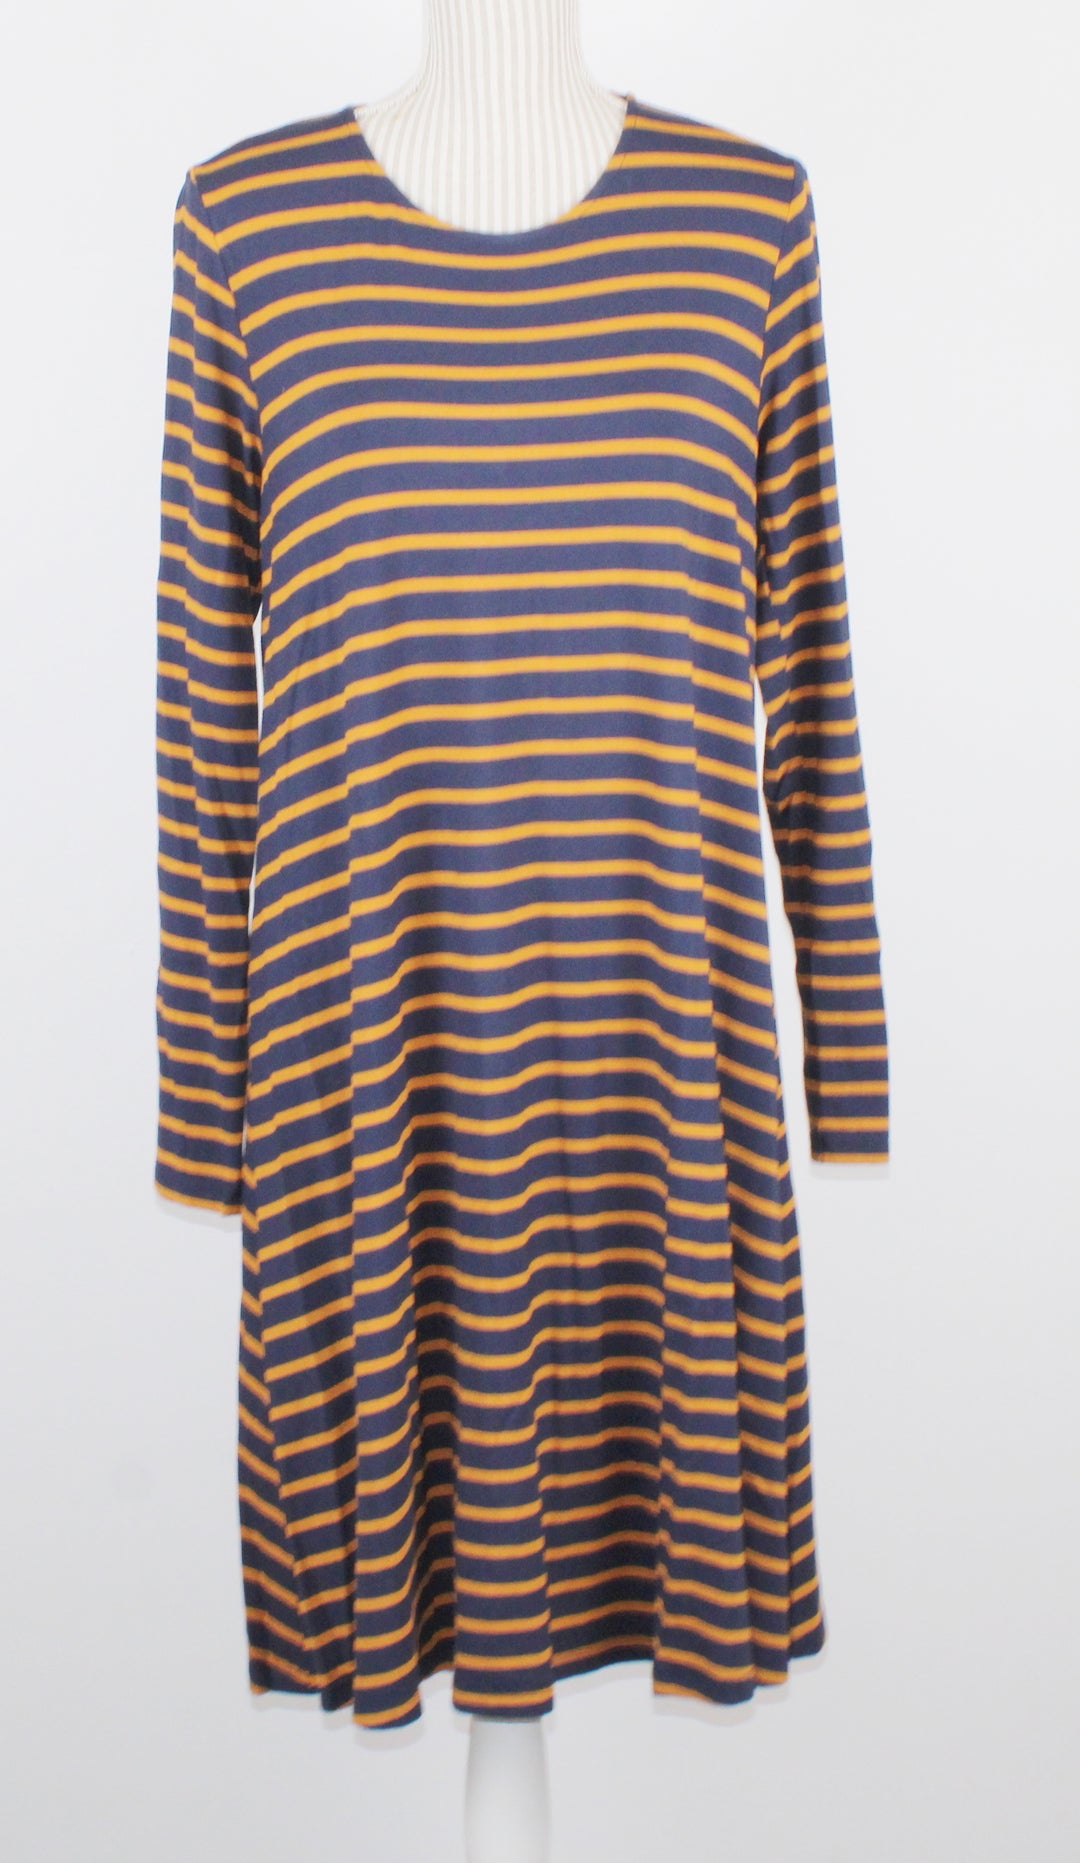 OLD NAVY COPPER/NAVY STRIPED DRESS LADIES LARGE TALL EUC